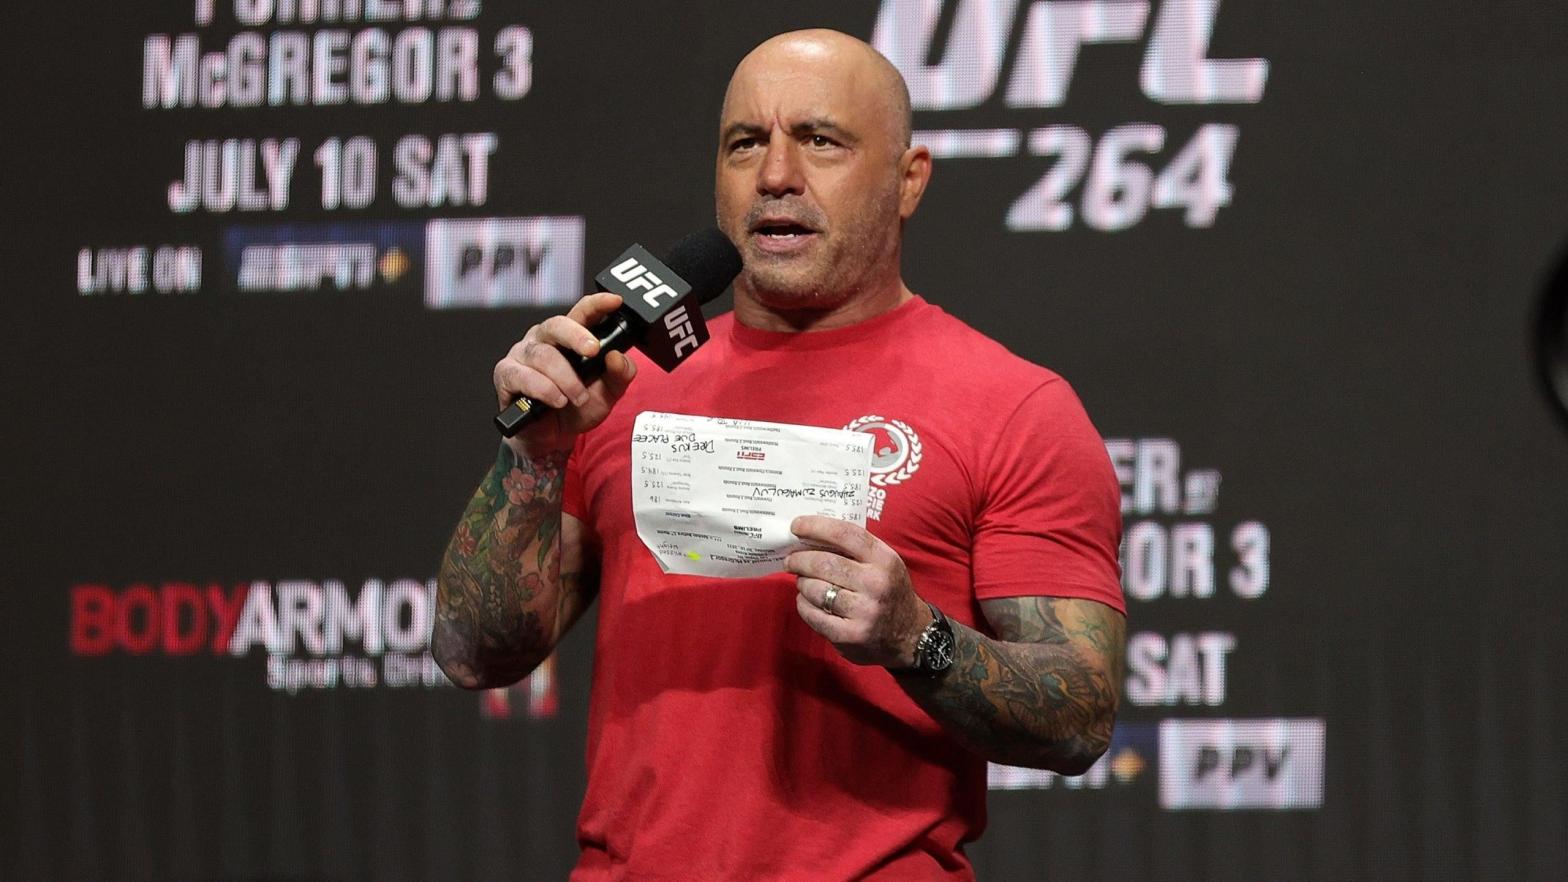 Joe Rogan announces the fighters during a ceremonial weigh in for UFC 264 at T-Mobile Arena on July 09, 2021 in Las Vegas, Nevada.  (Photo: Stacy Revere, Getty Images)